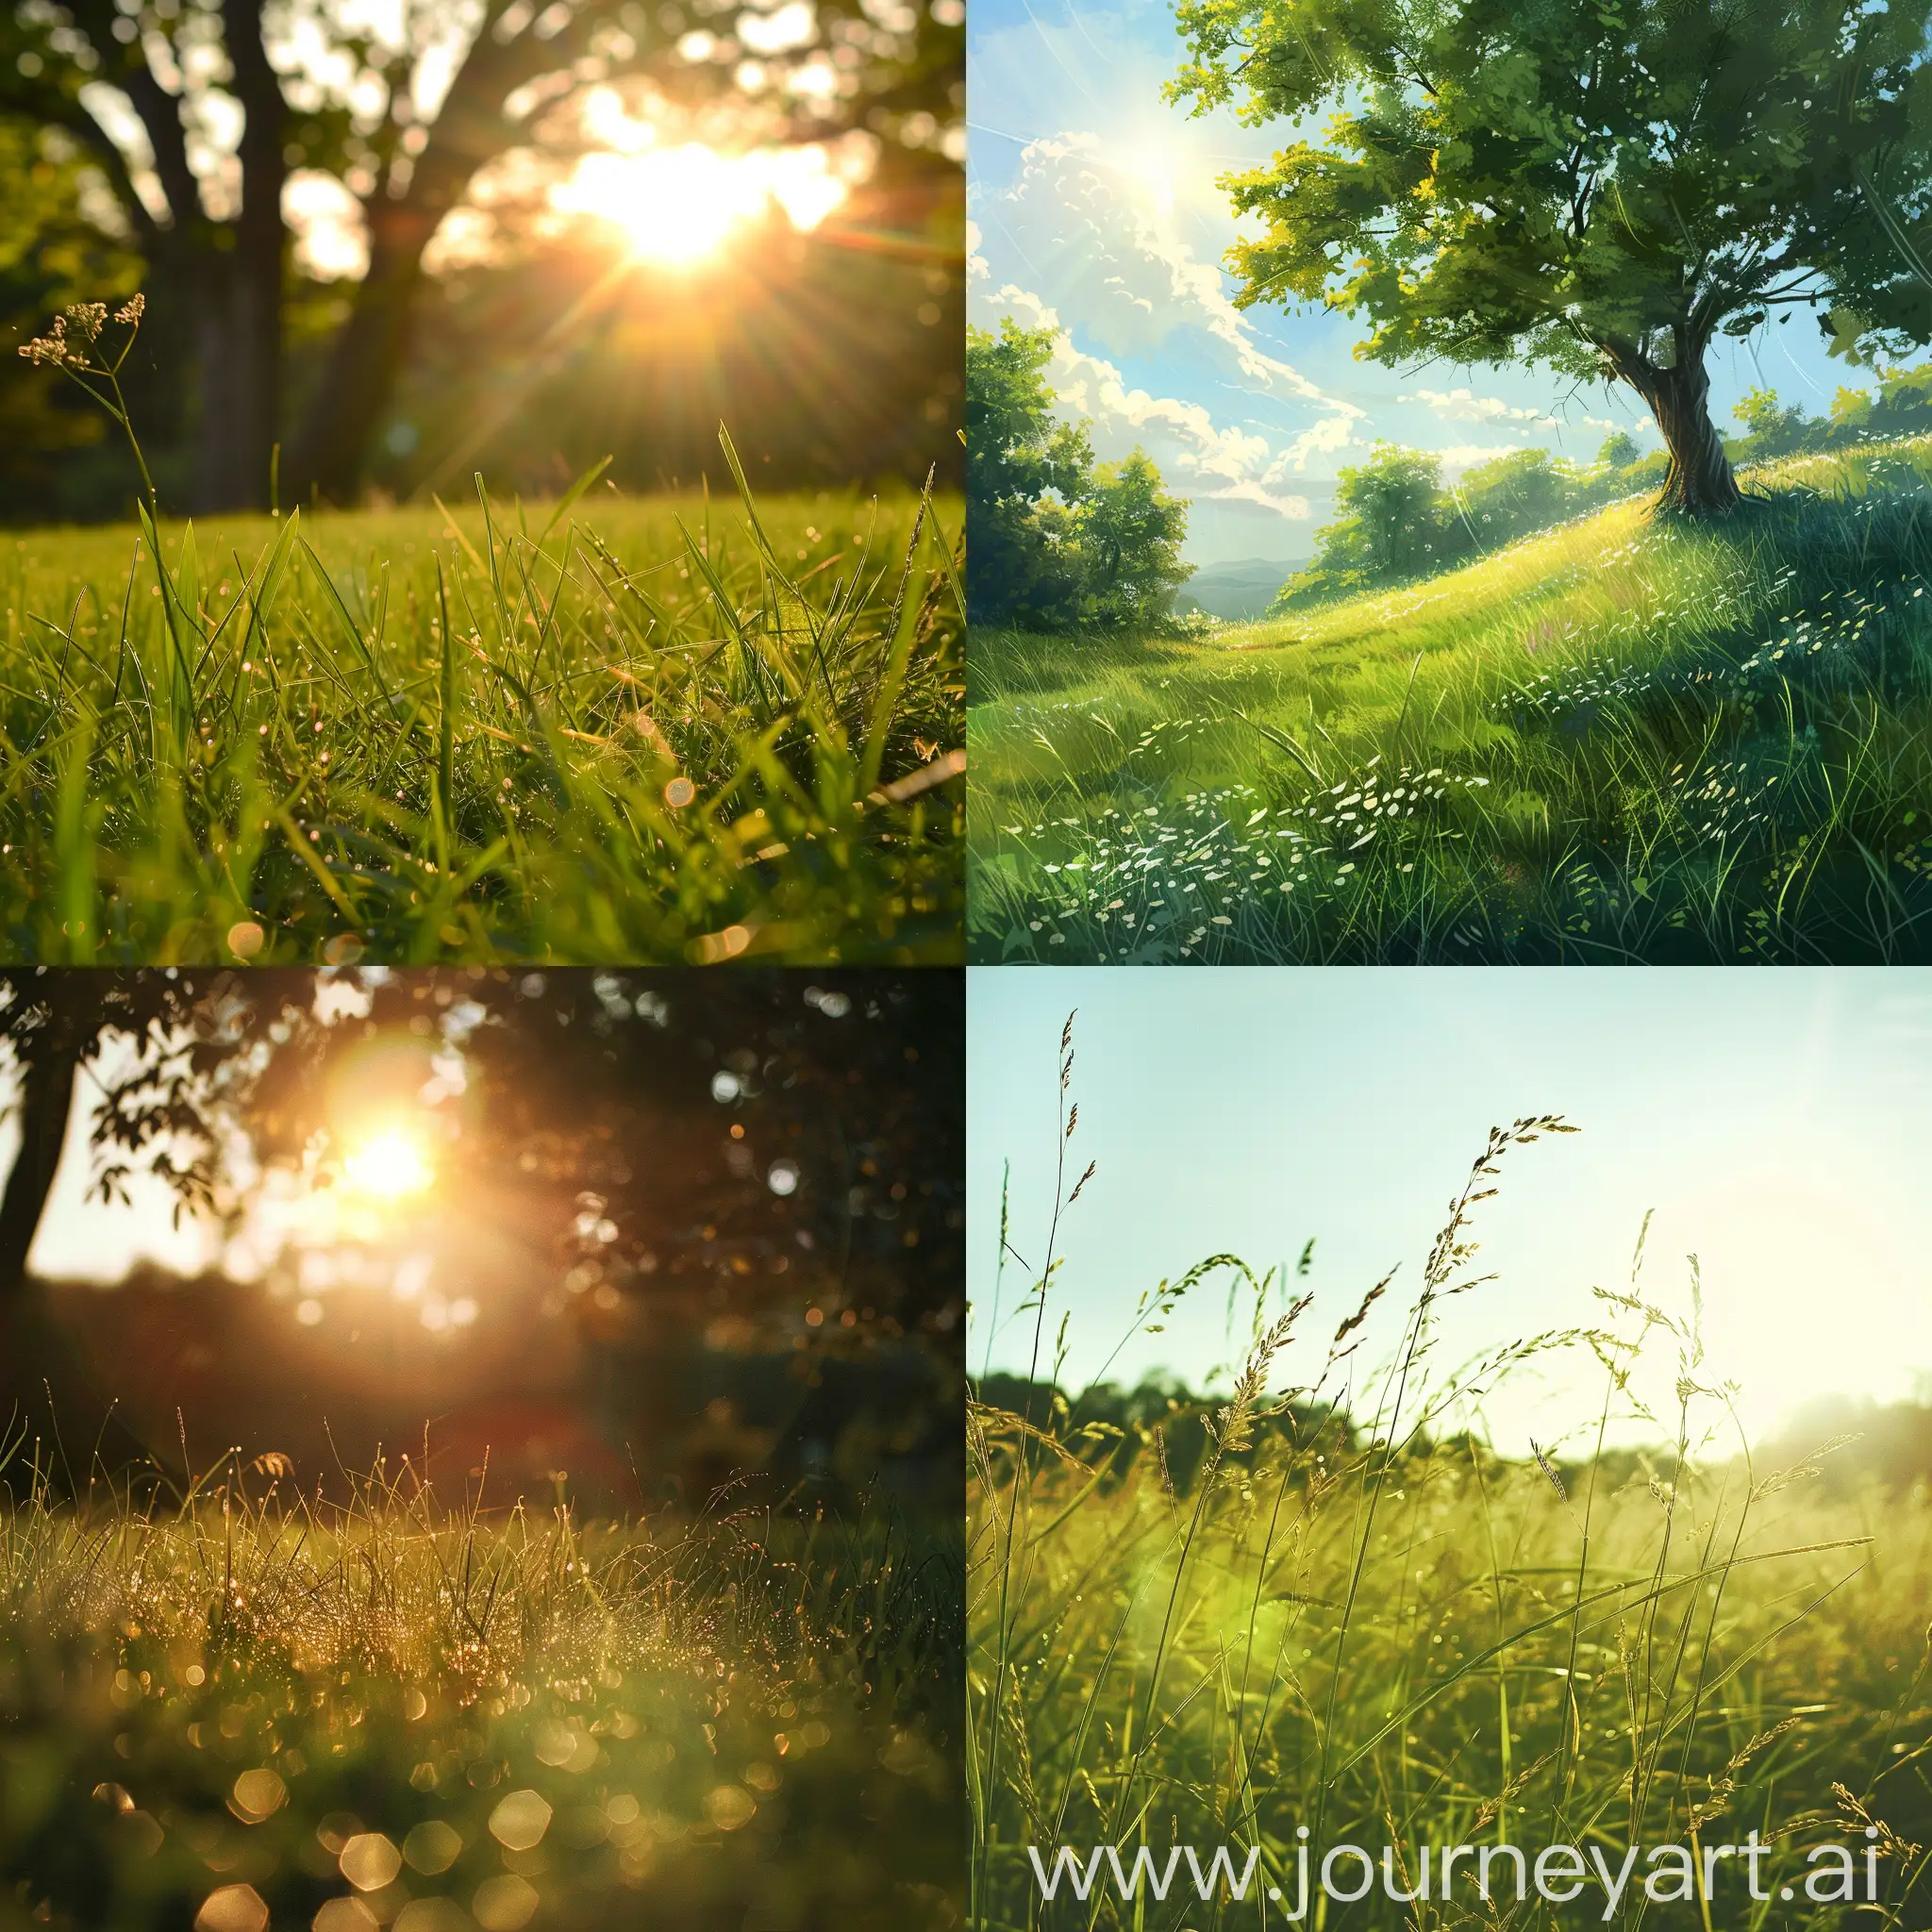 Bright-Sunny-Day-in-Lush-Green-Meadow